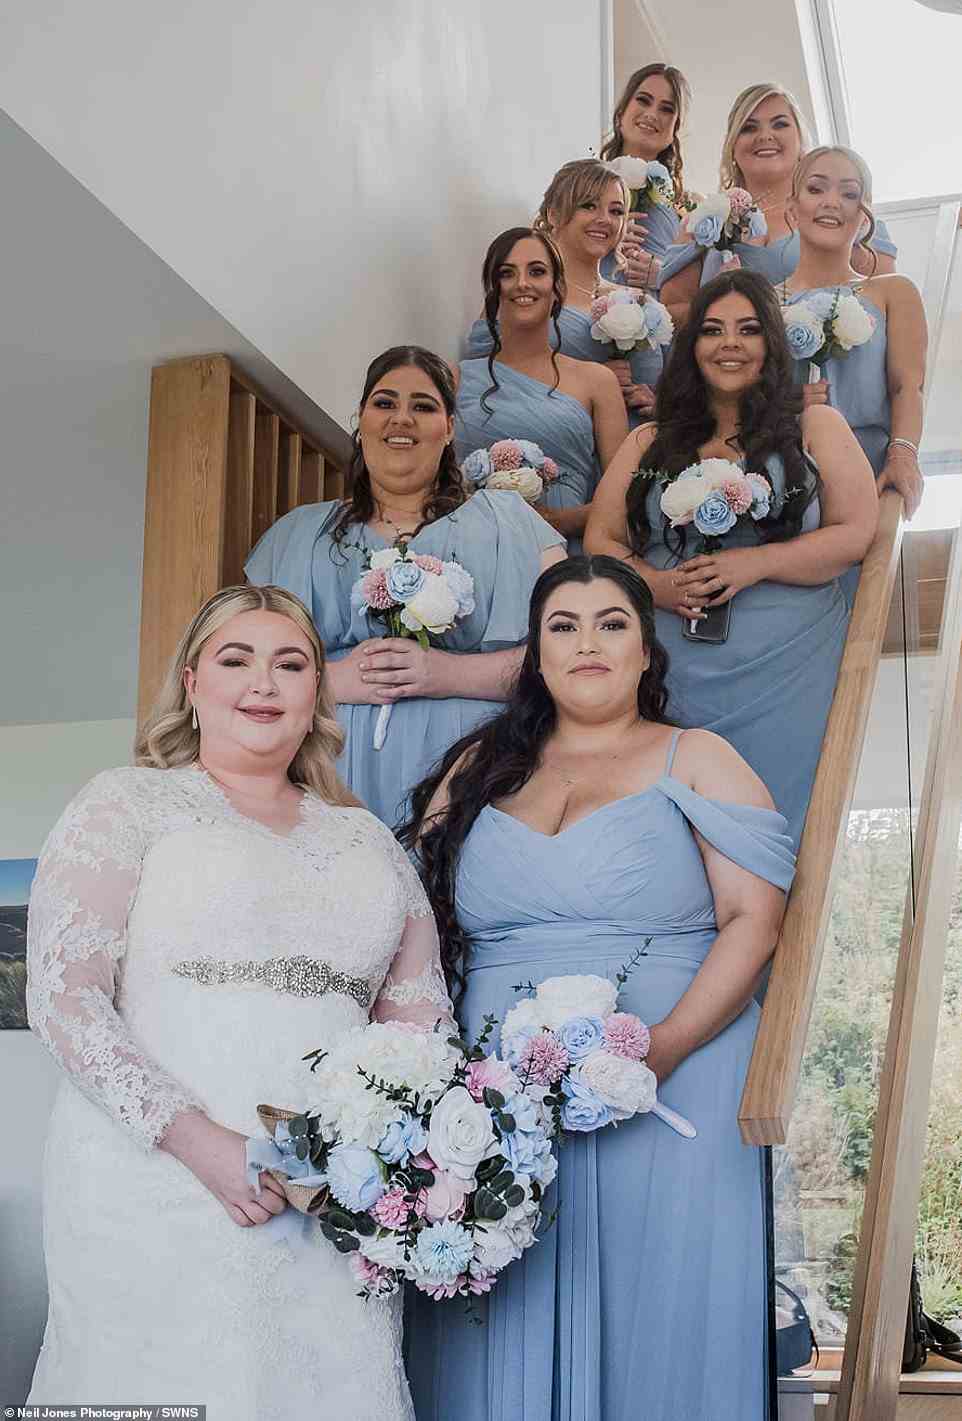 Friends: Kayley (pictured with her bridesmaids) said 'asked the girls, his family and the groomsmen to continue getting ready, because I honestly believed he was going to be there'